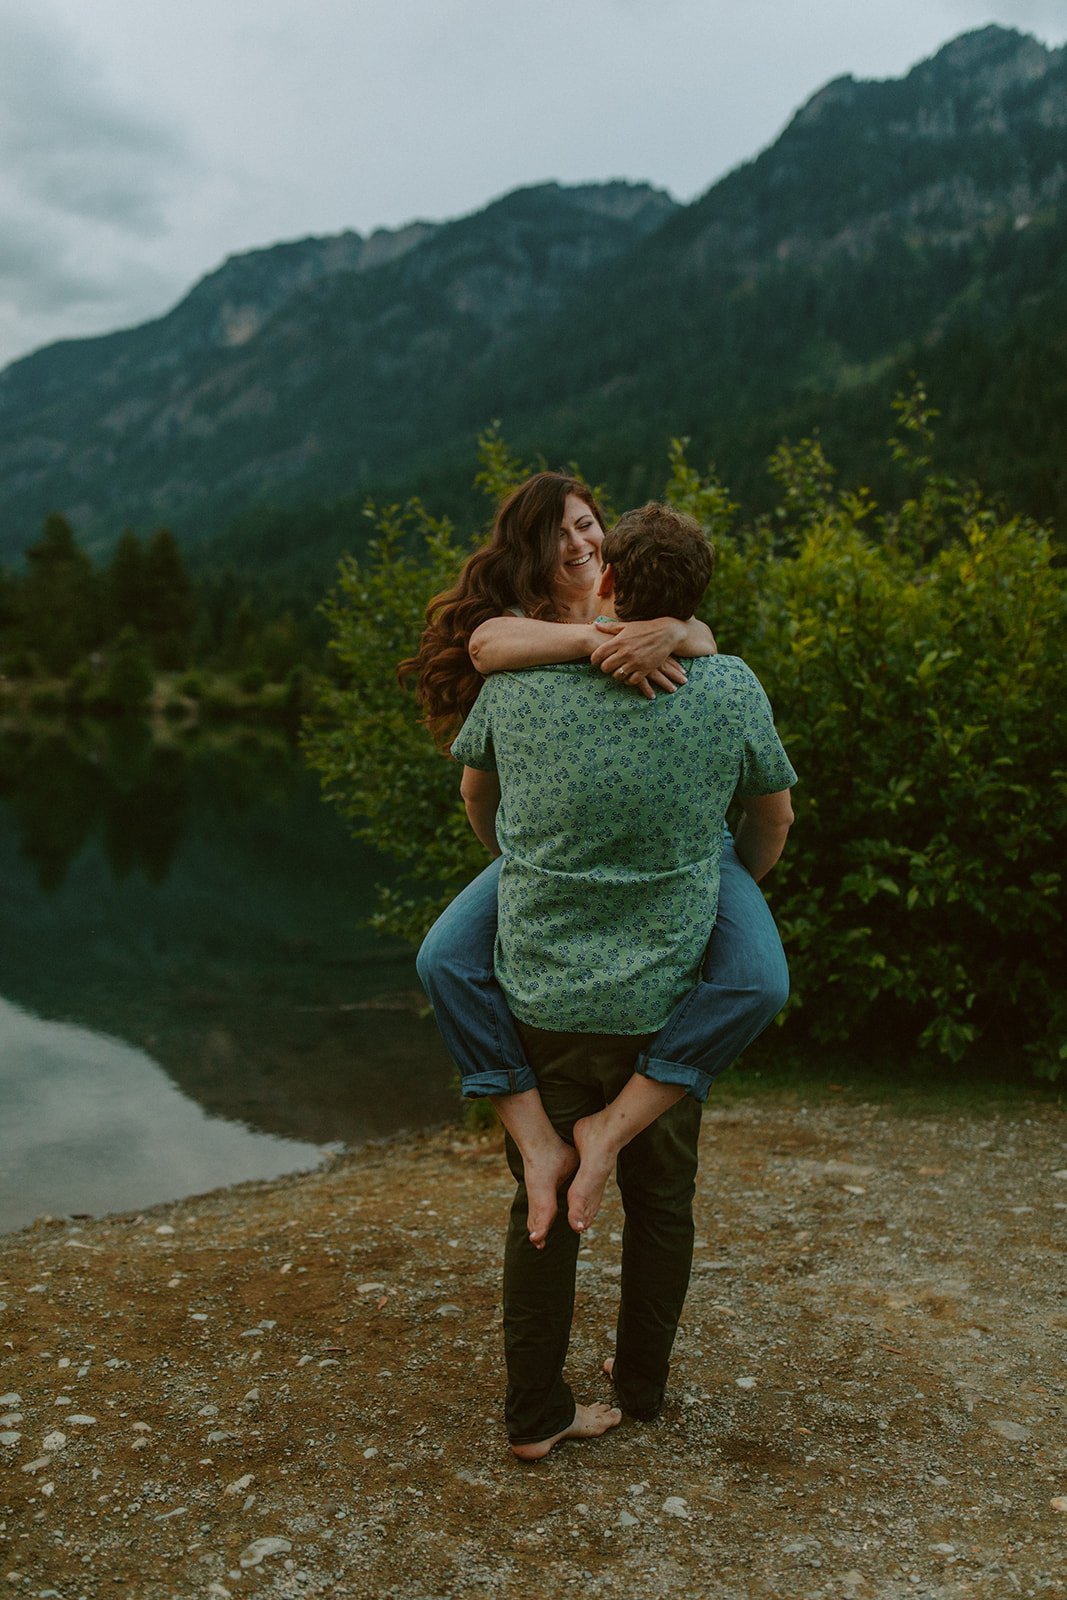 A Gold Creek Pond Outdoor Engagement Session - Shanean + Ian (132).jpg